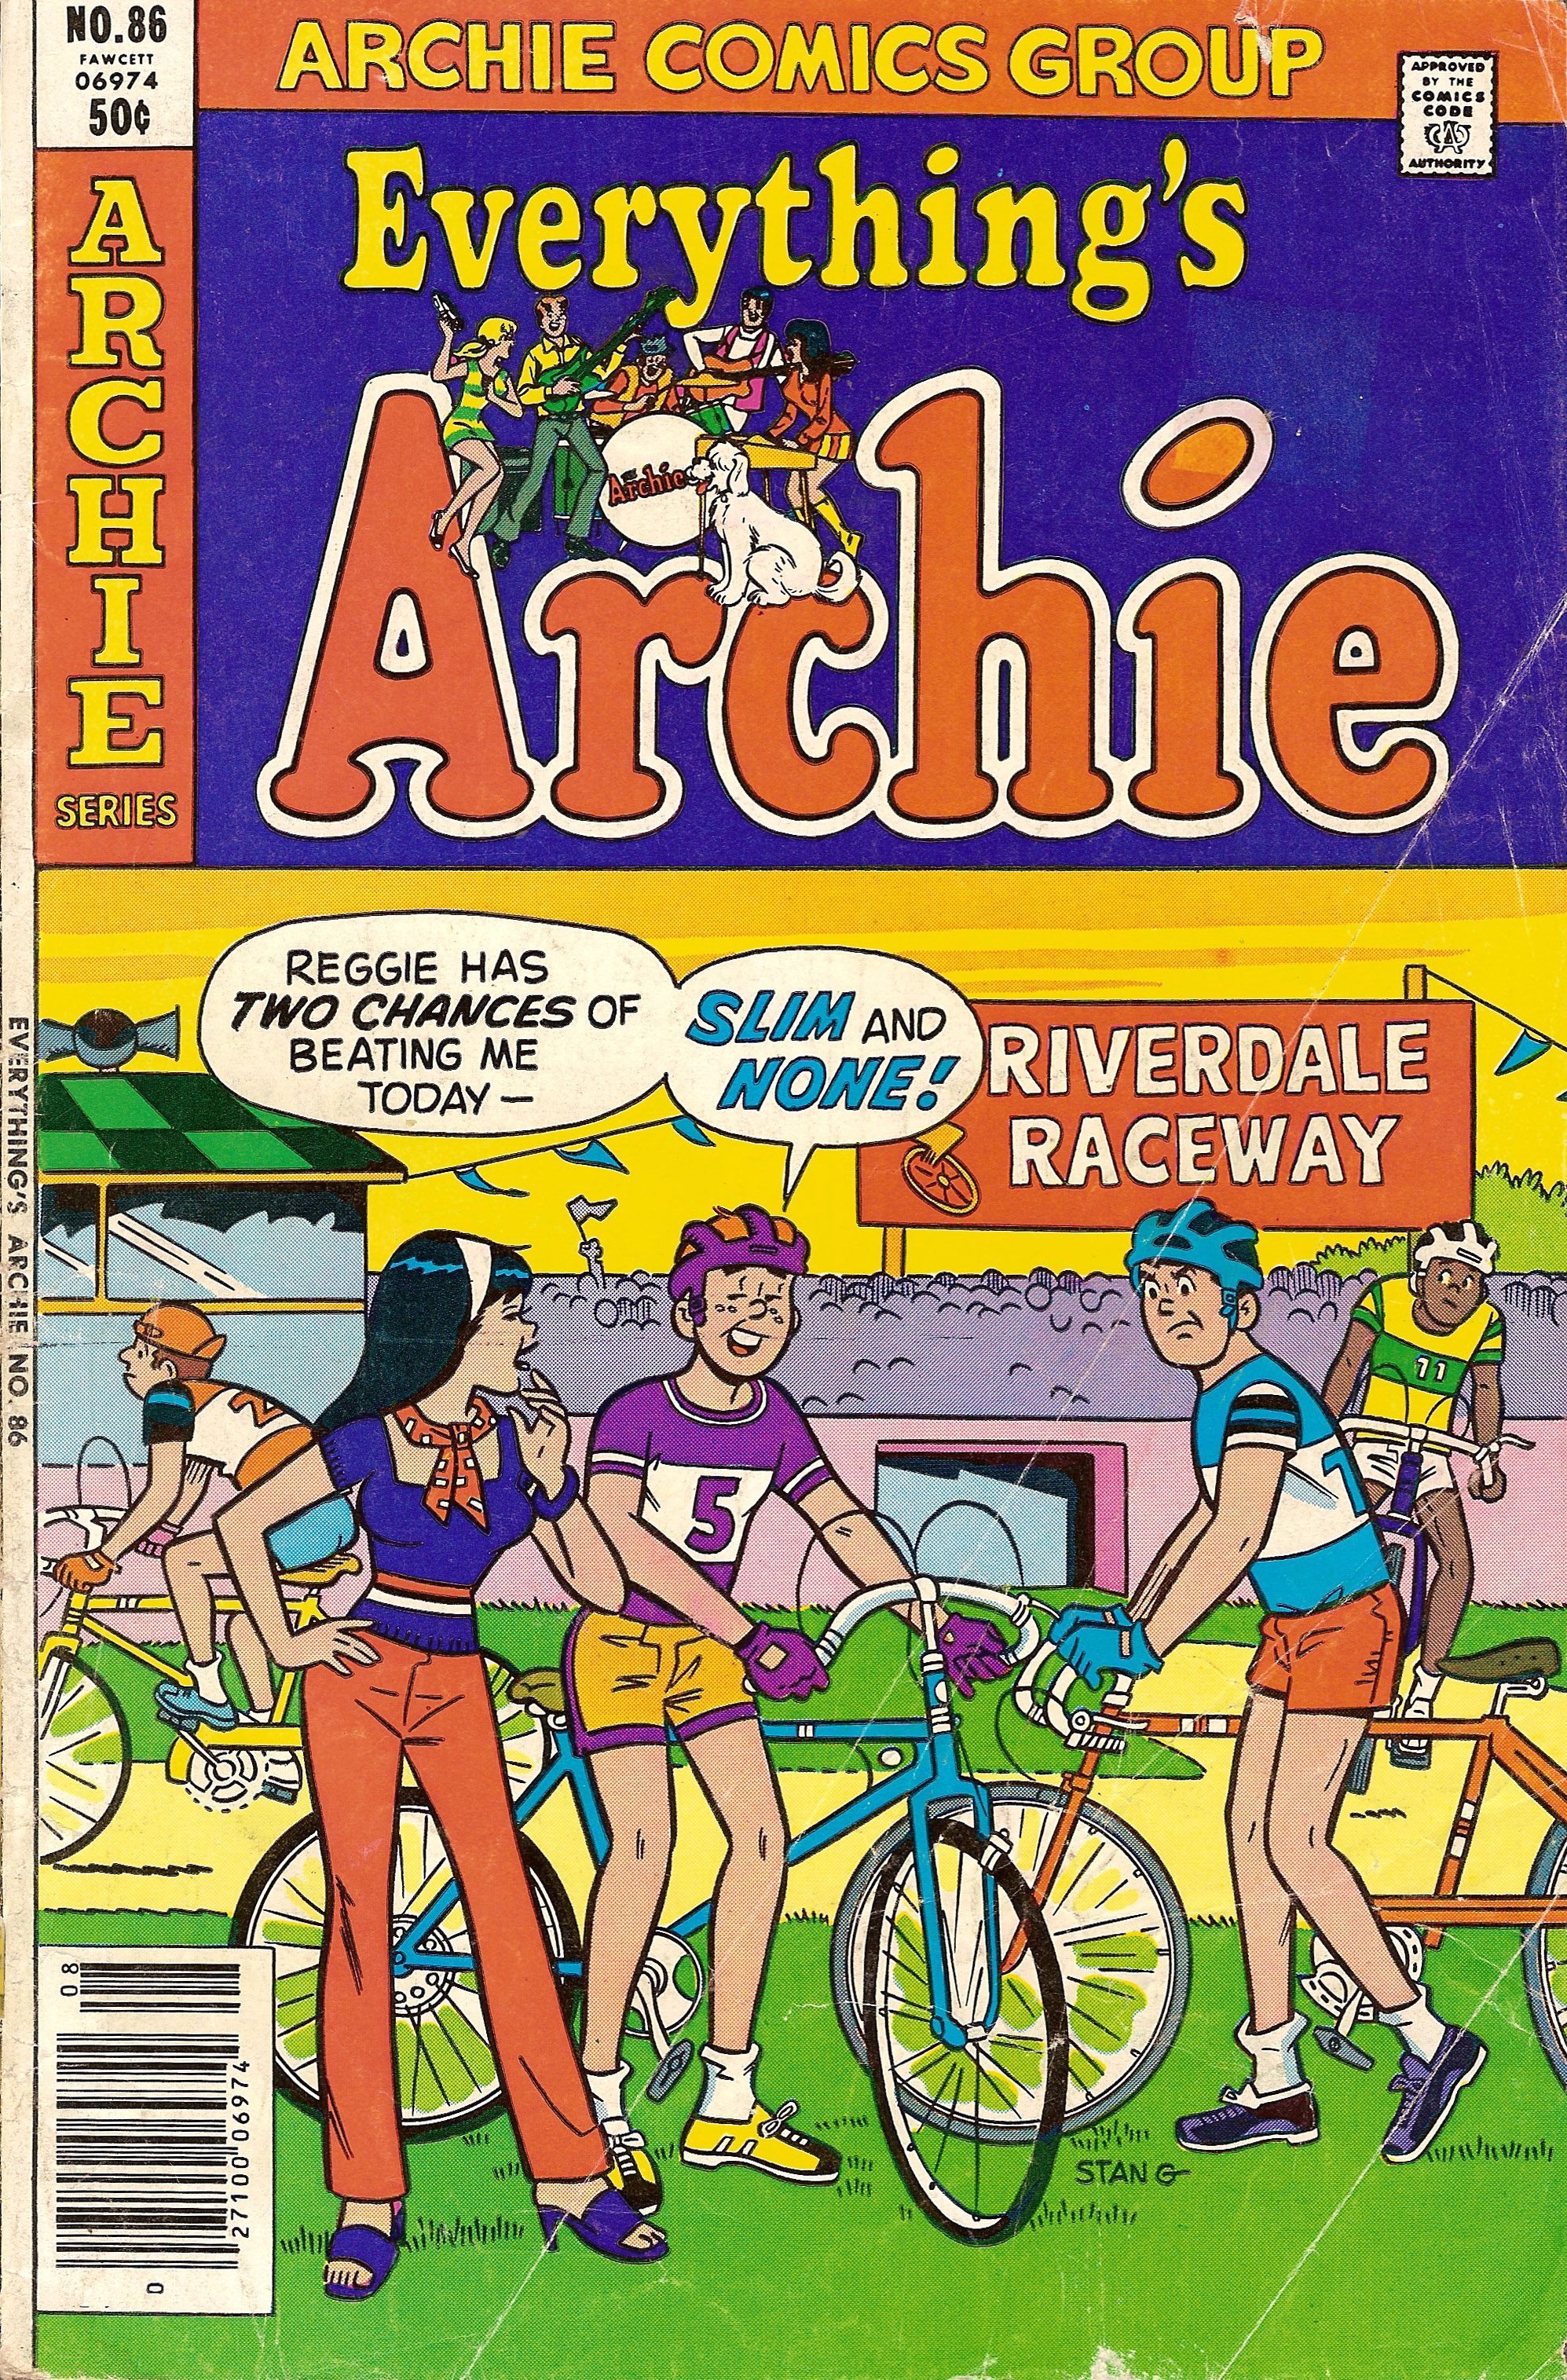 Read online Everything's Archie comic -  Issue #86 - 1